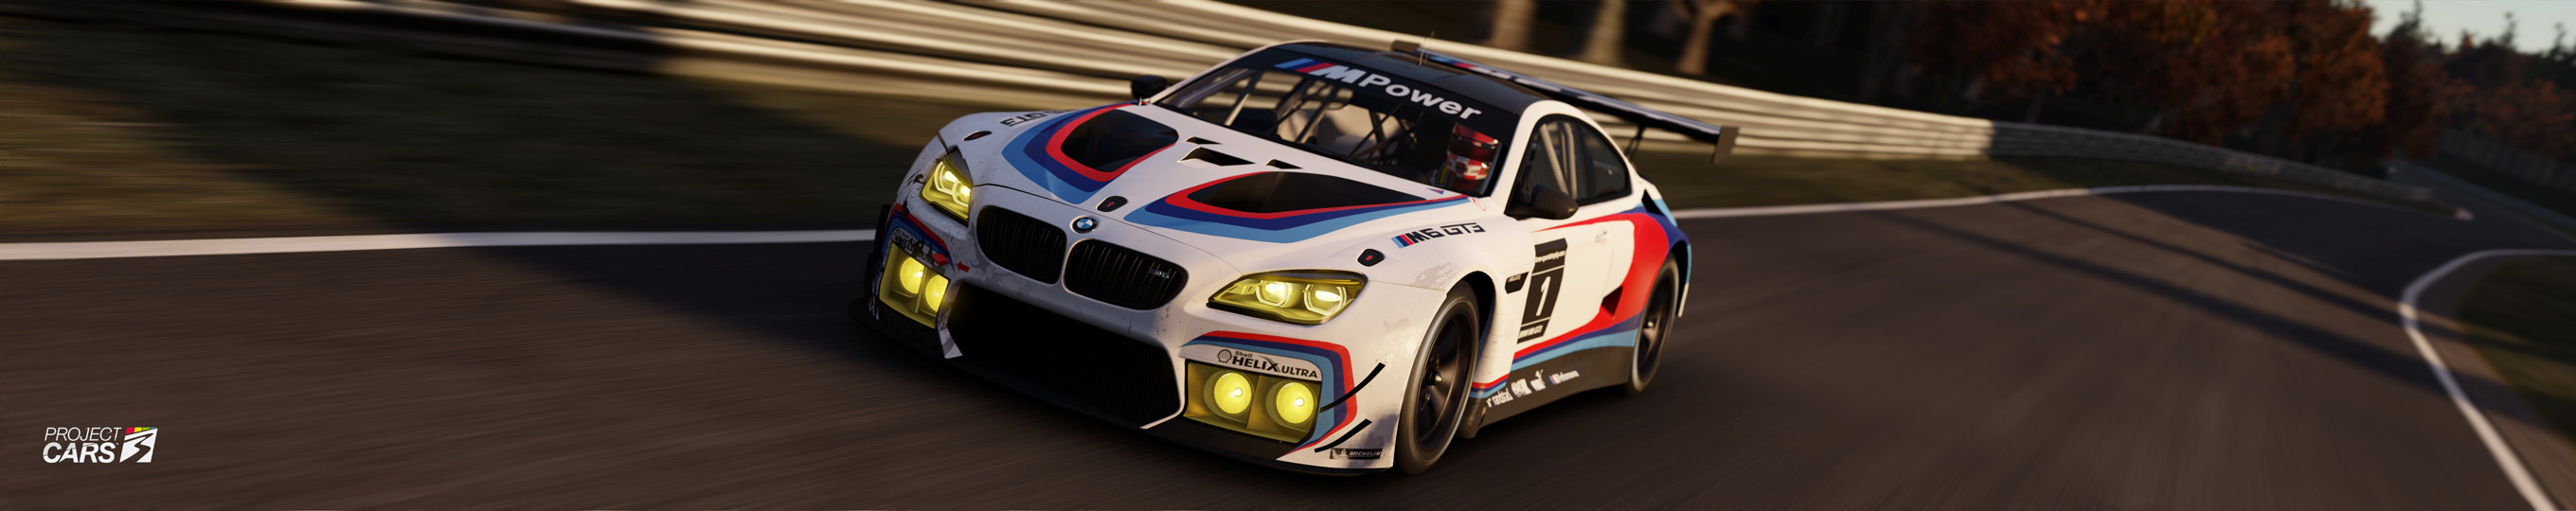 1 PROJECT CARS 3 BMW GT3 on NORDS crop copy.jpg